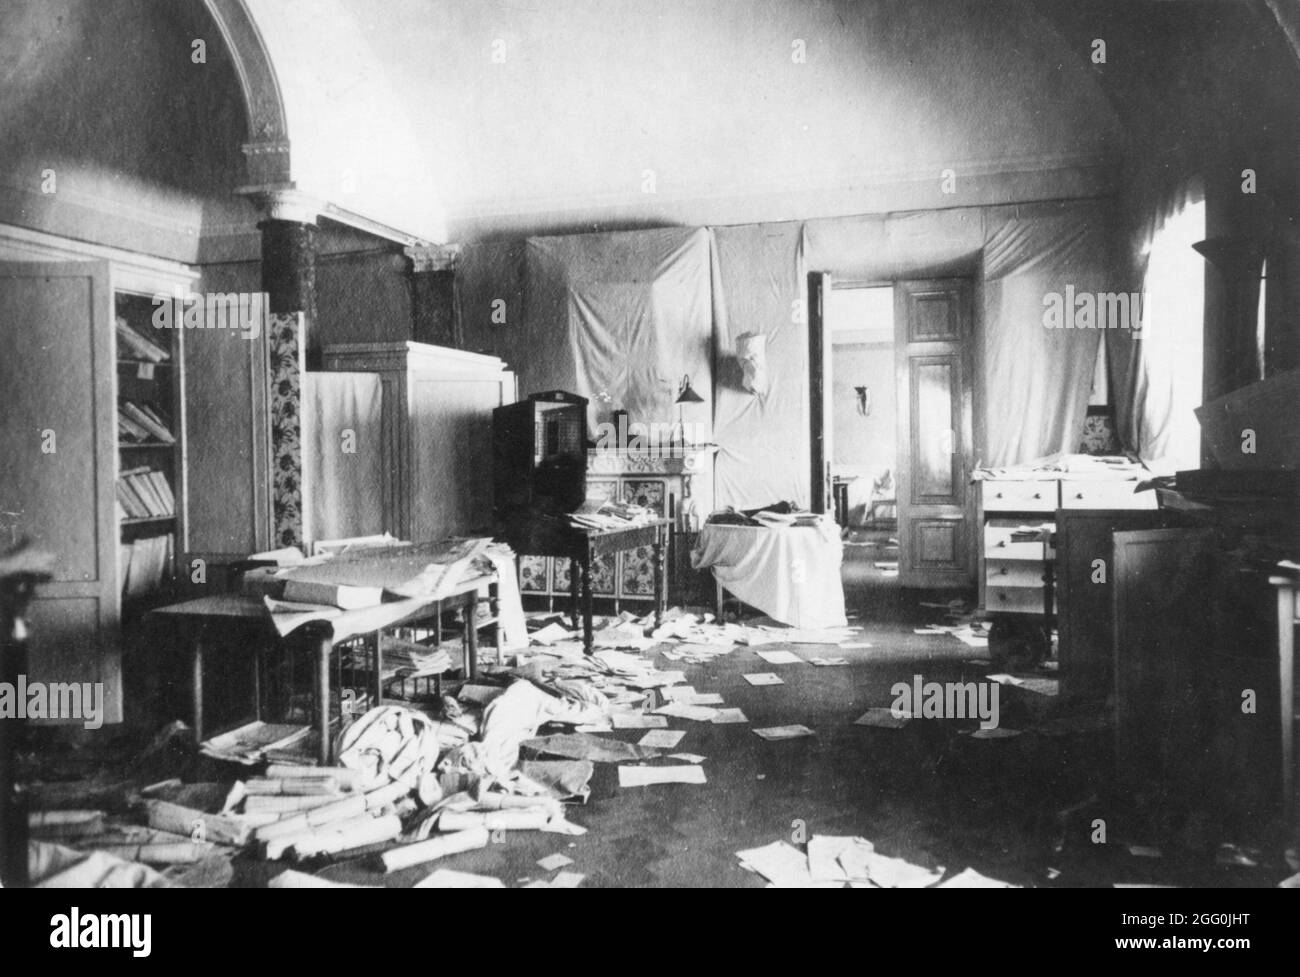 Duchess Tatiana's room in the Winter Palace in St Petersburg looted and damaged after the October Revolution. Saint Petersburg, Russia, 8th November 1917. Stock Photo